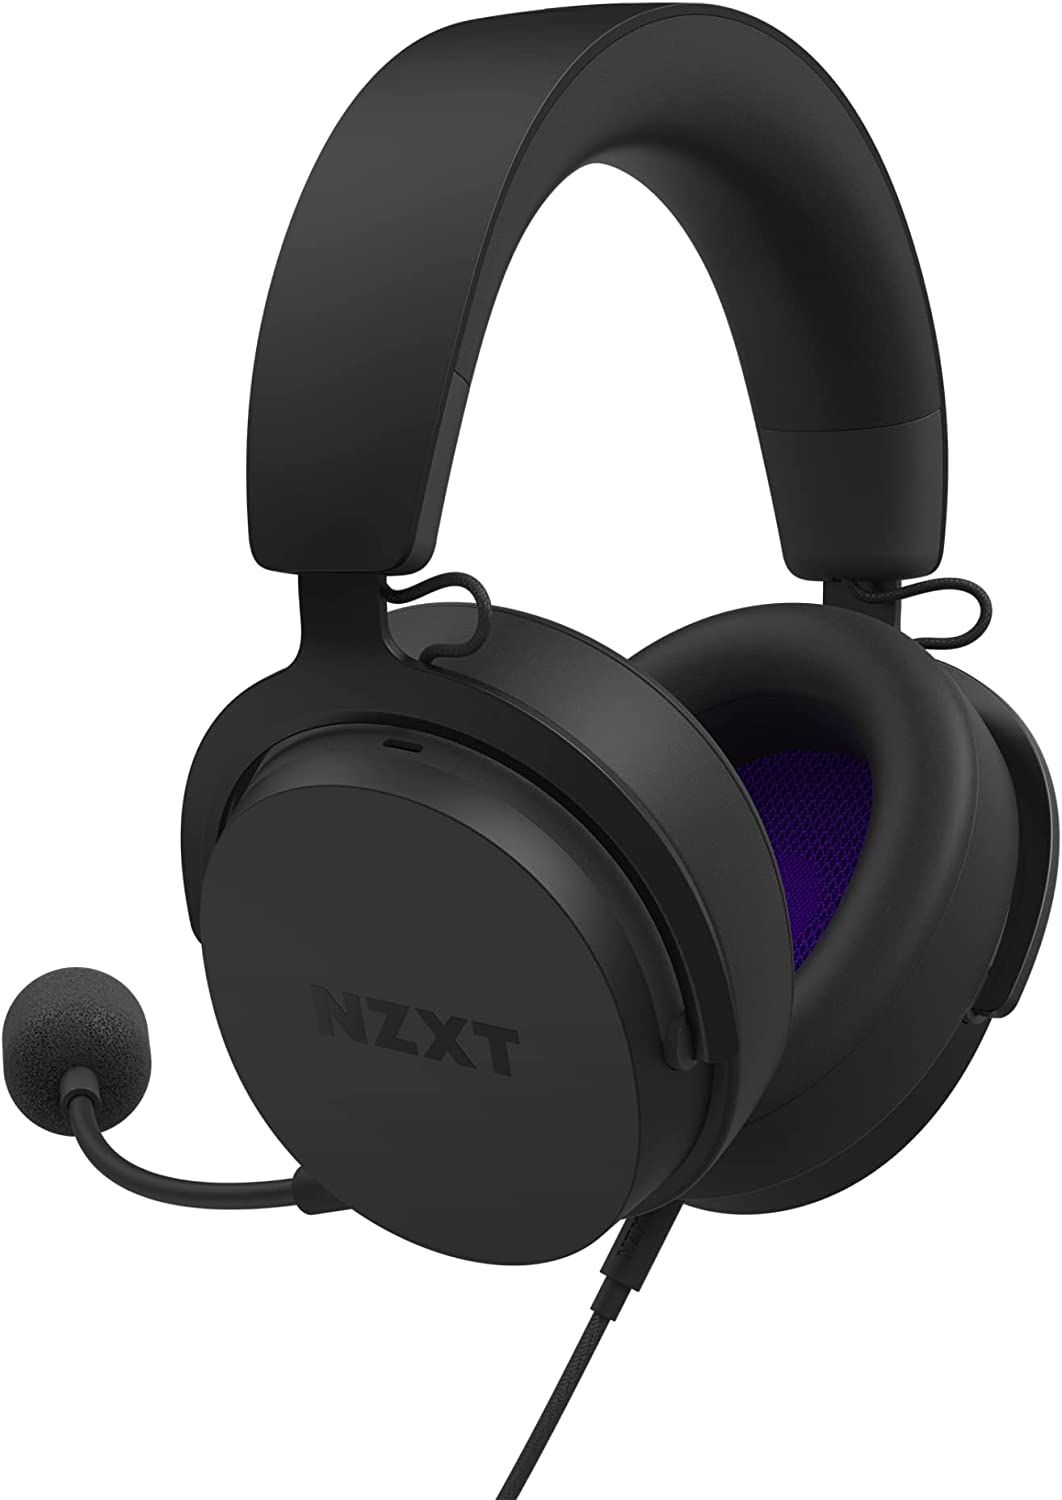 NZXT Relay Hi-Res Certified Gaming Headset